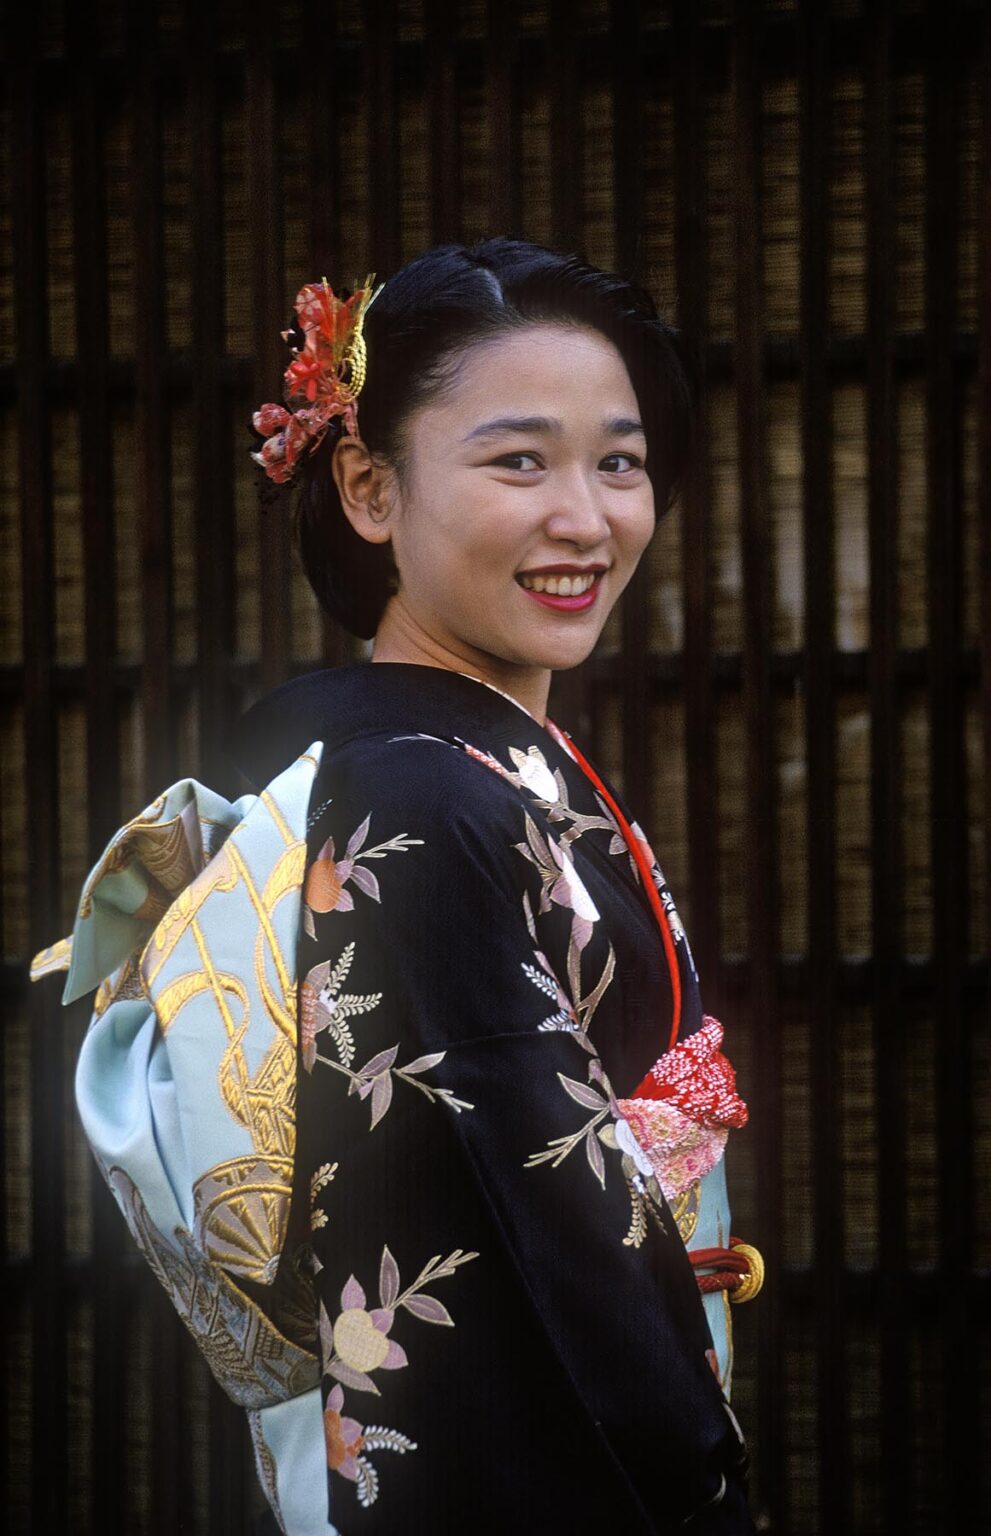 A JAPANESE woman is dressed in a traditional KIMONO to celebrate her upcoming marriage - KURASHIKI, JAPAN